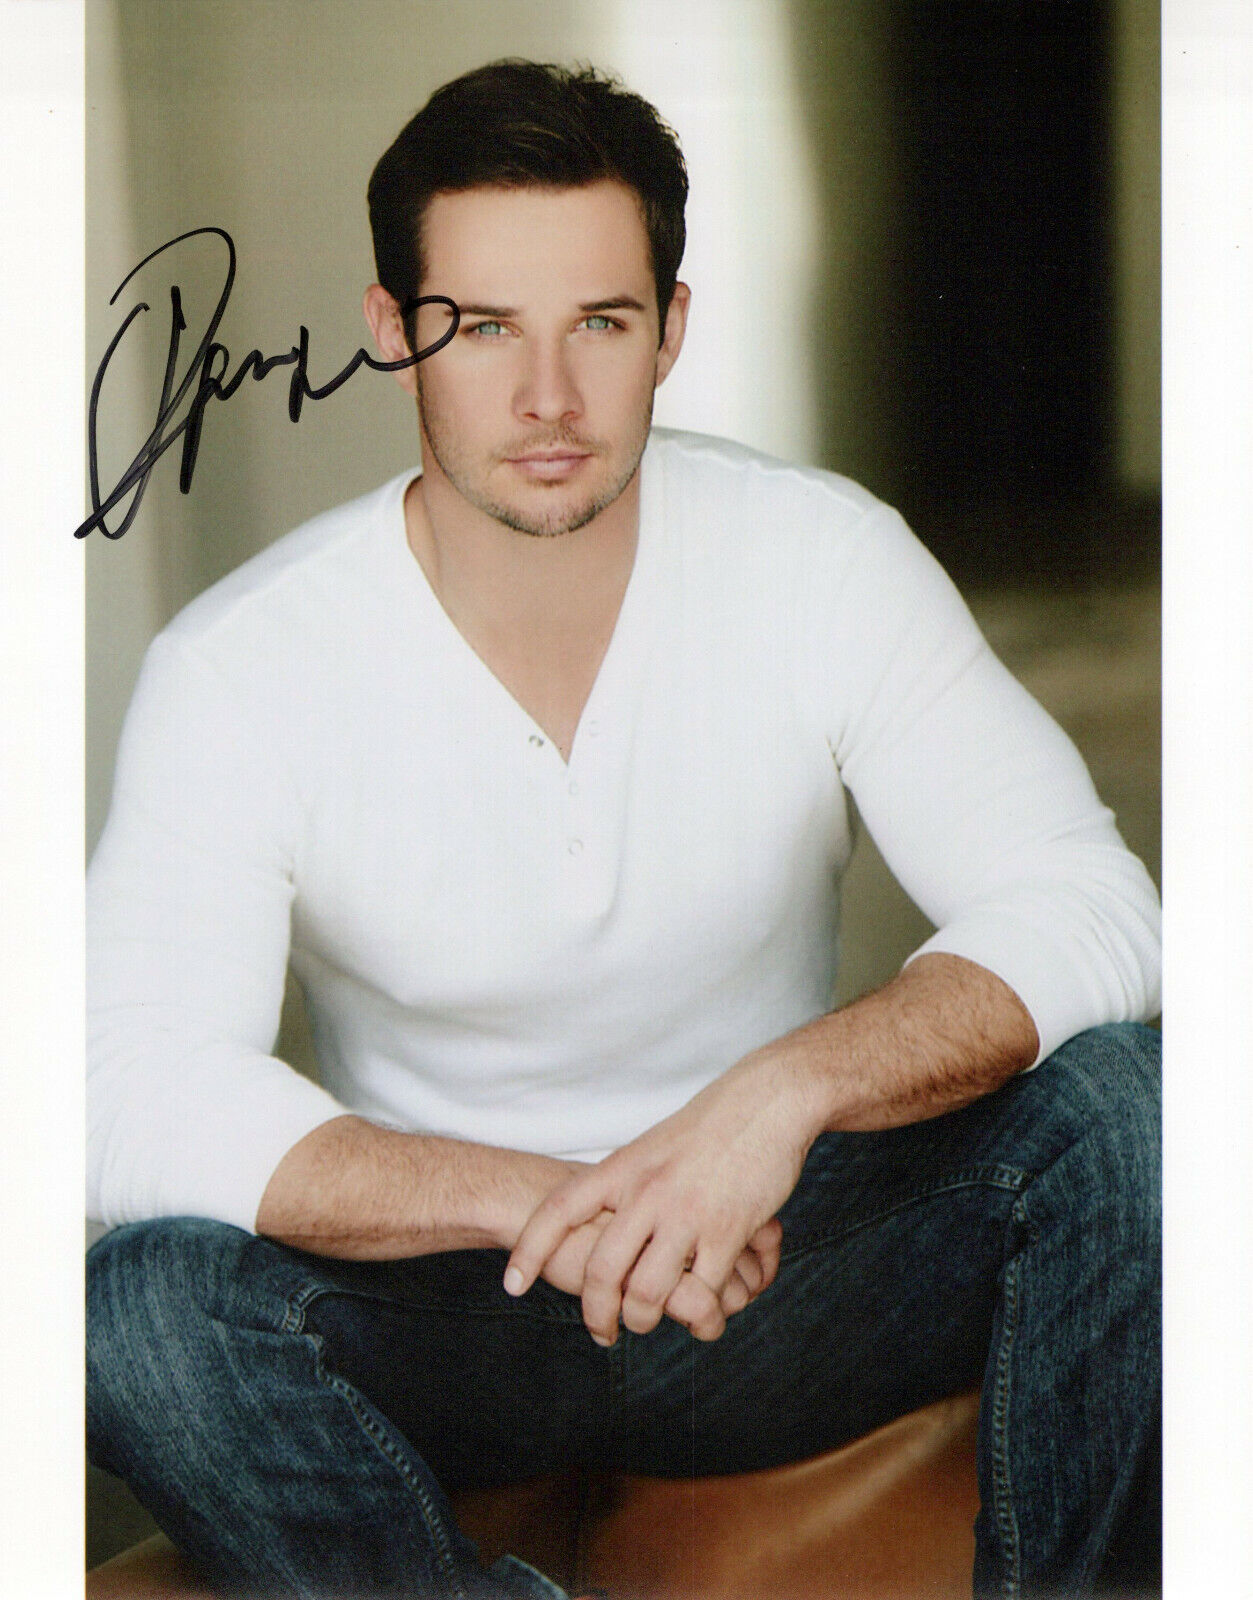 Ryan Merriman head shot autographed Photo Poster painting signed 8x10 #10